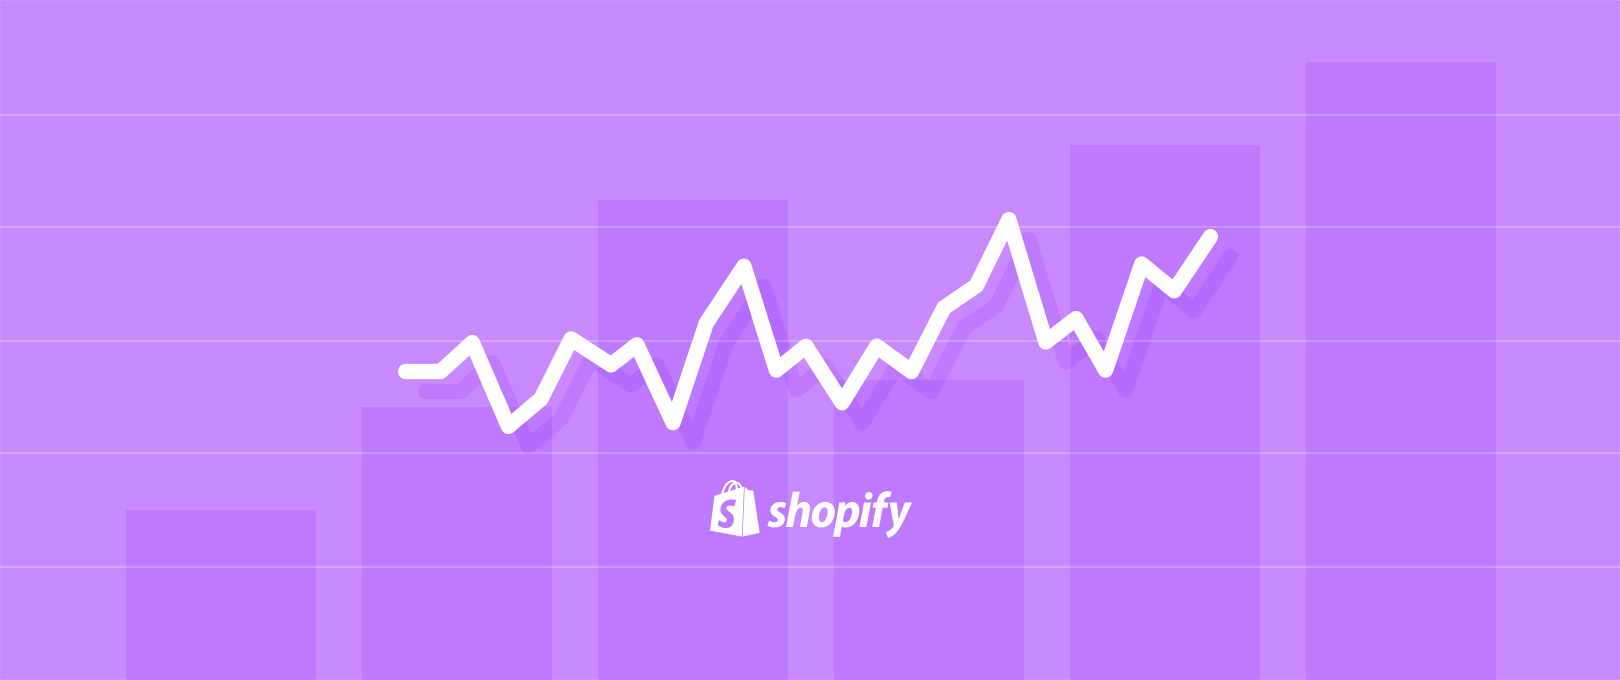 Shopify: New Insight Reports Will Help Increase Your Sales